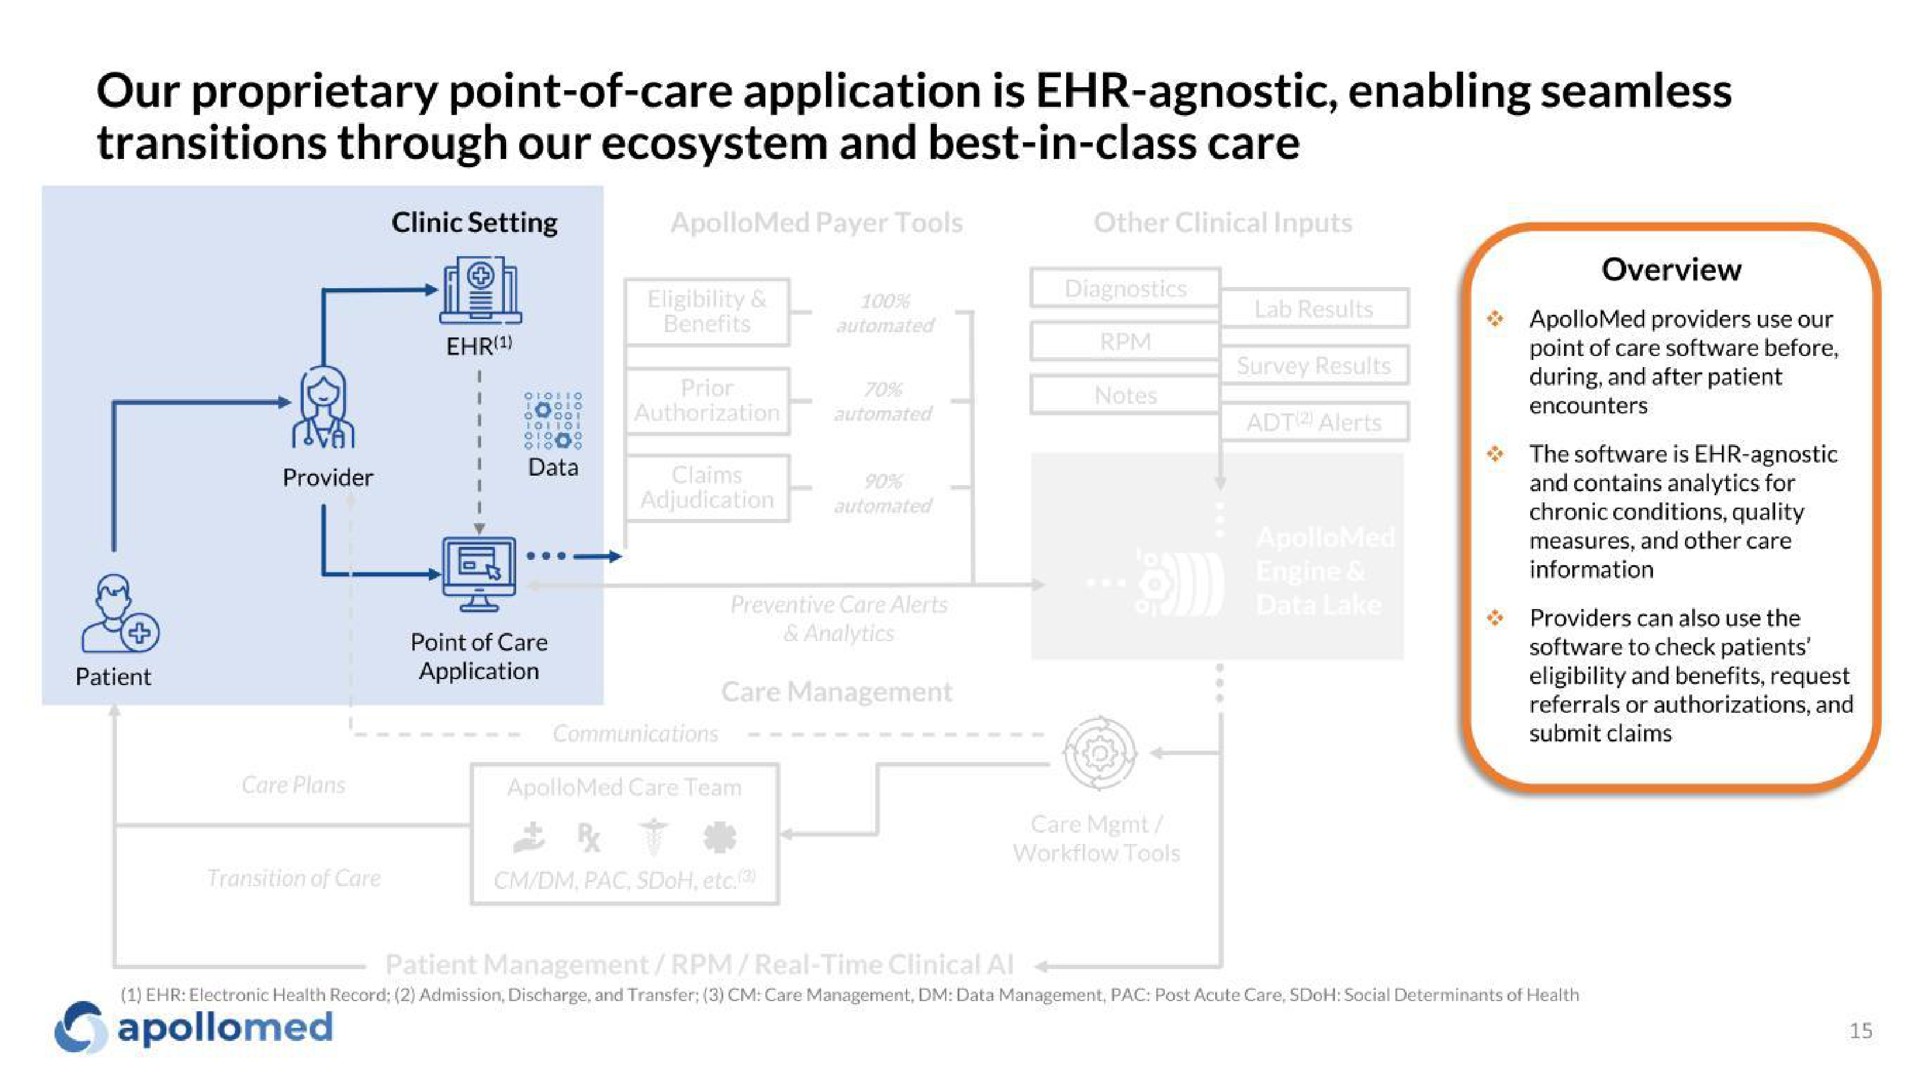 our proprietary point of care application is agnostic enabling seamless transitions through our ecosystem and best in class care a tank vare | Apollo Medical Holdings